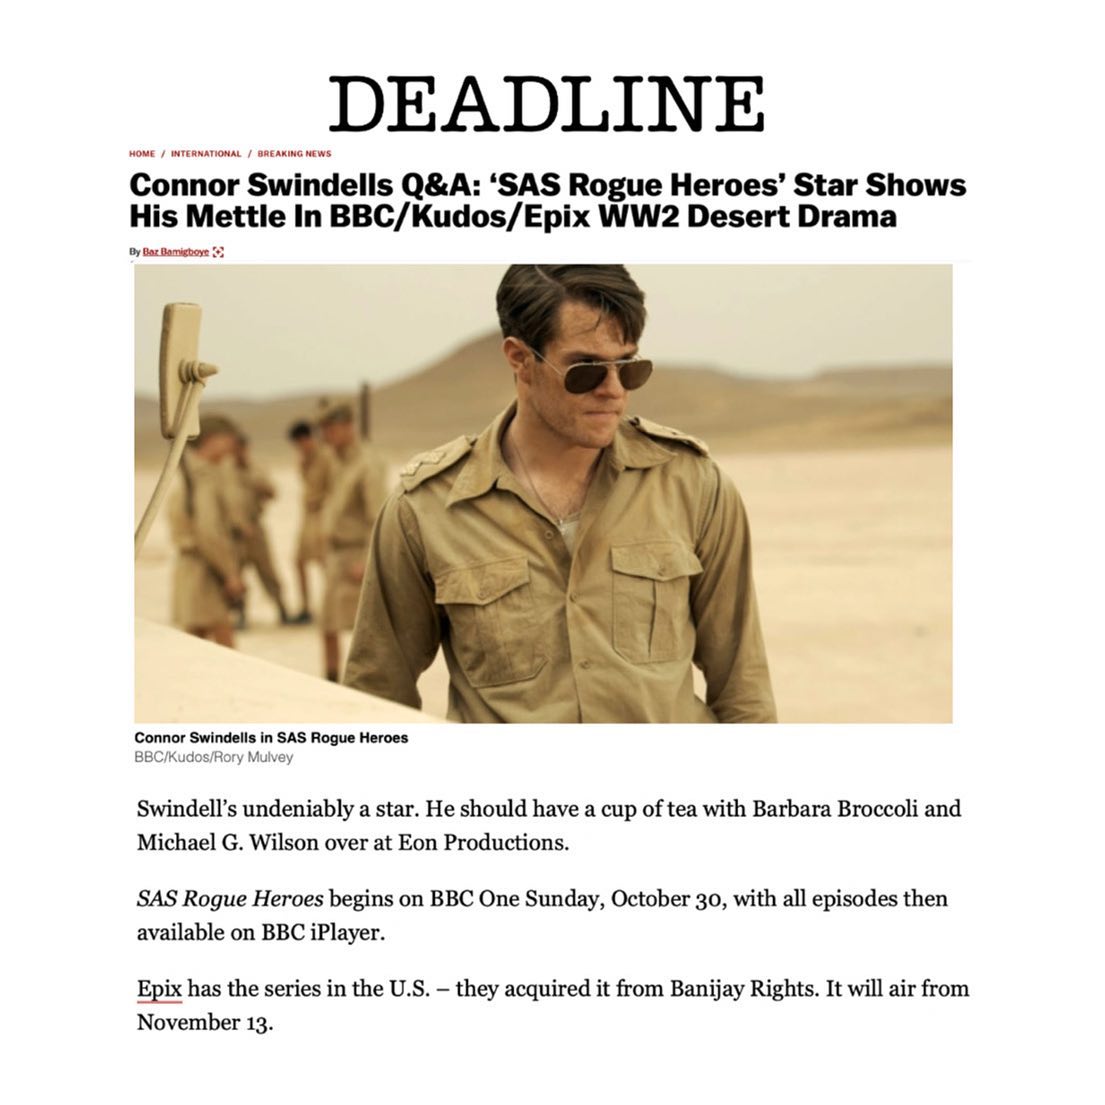 @connor_swindells speaks to @deadline regarding his upcoming role in @sasrogueheroes on @bbcone and @epix .
.
.
.
.
.
.